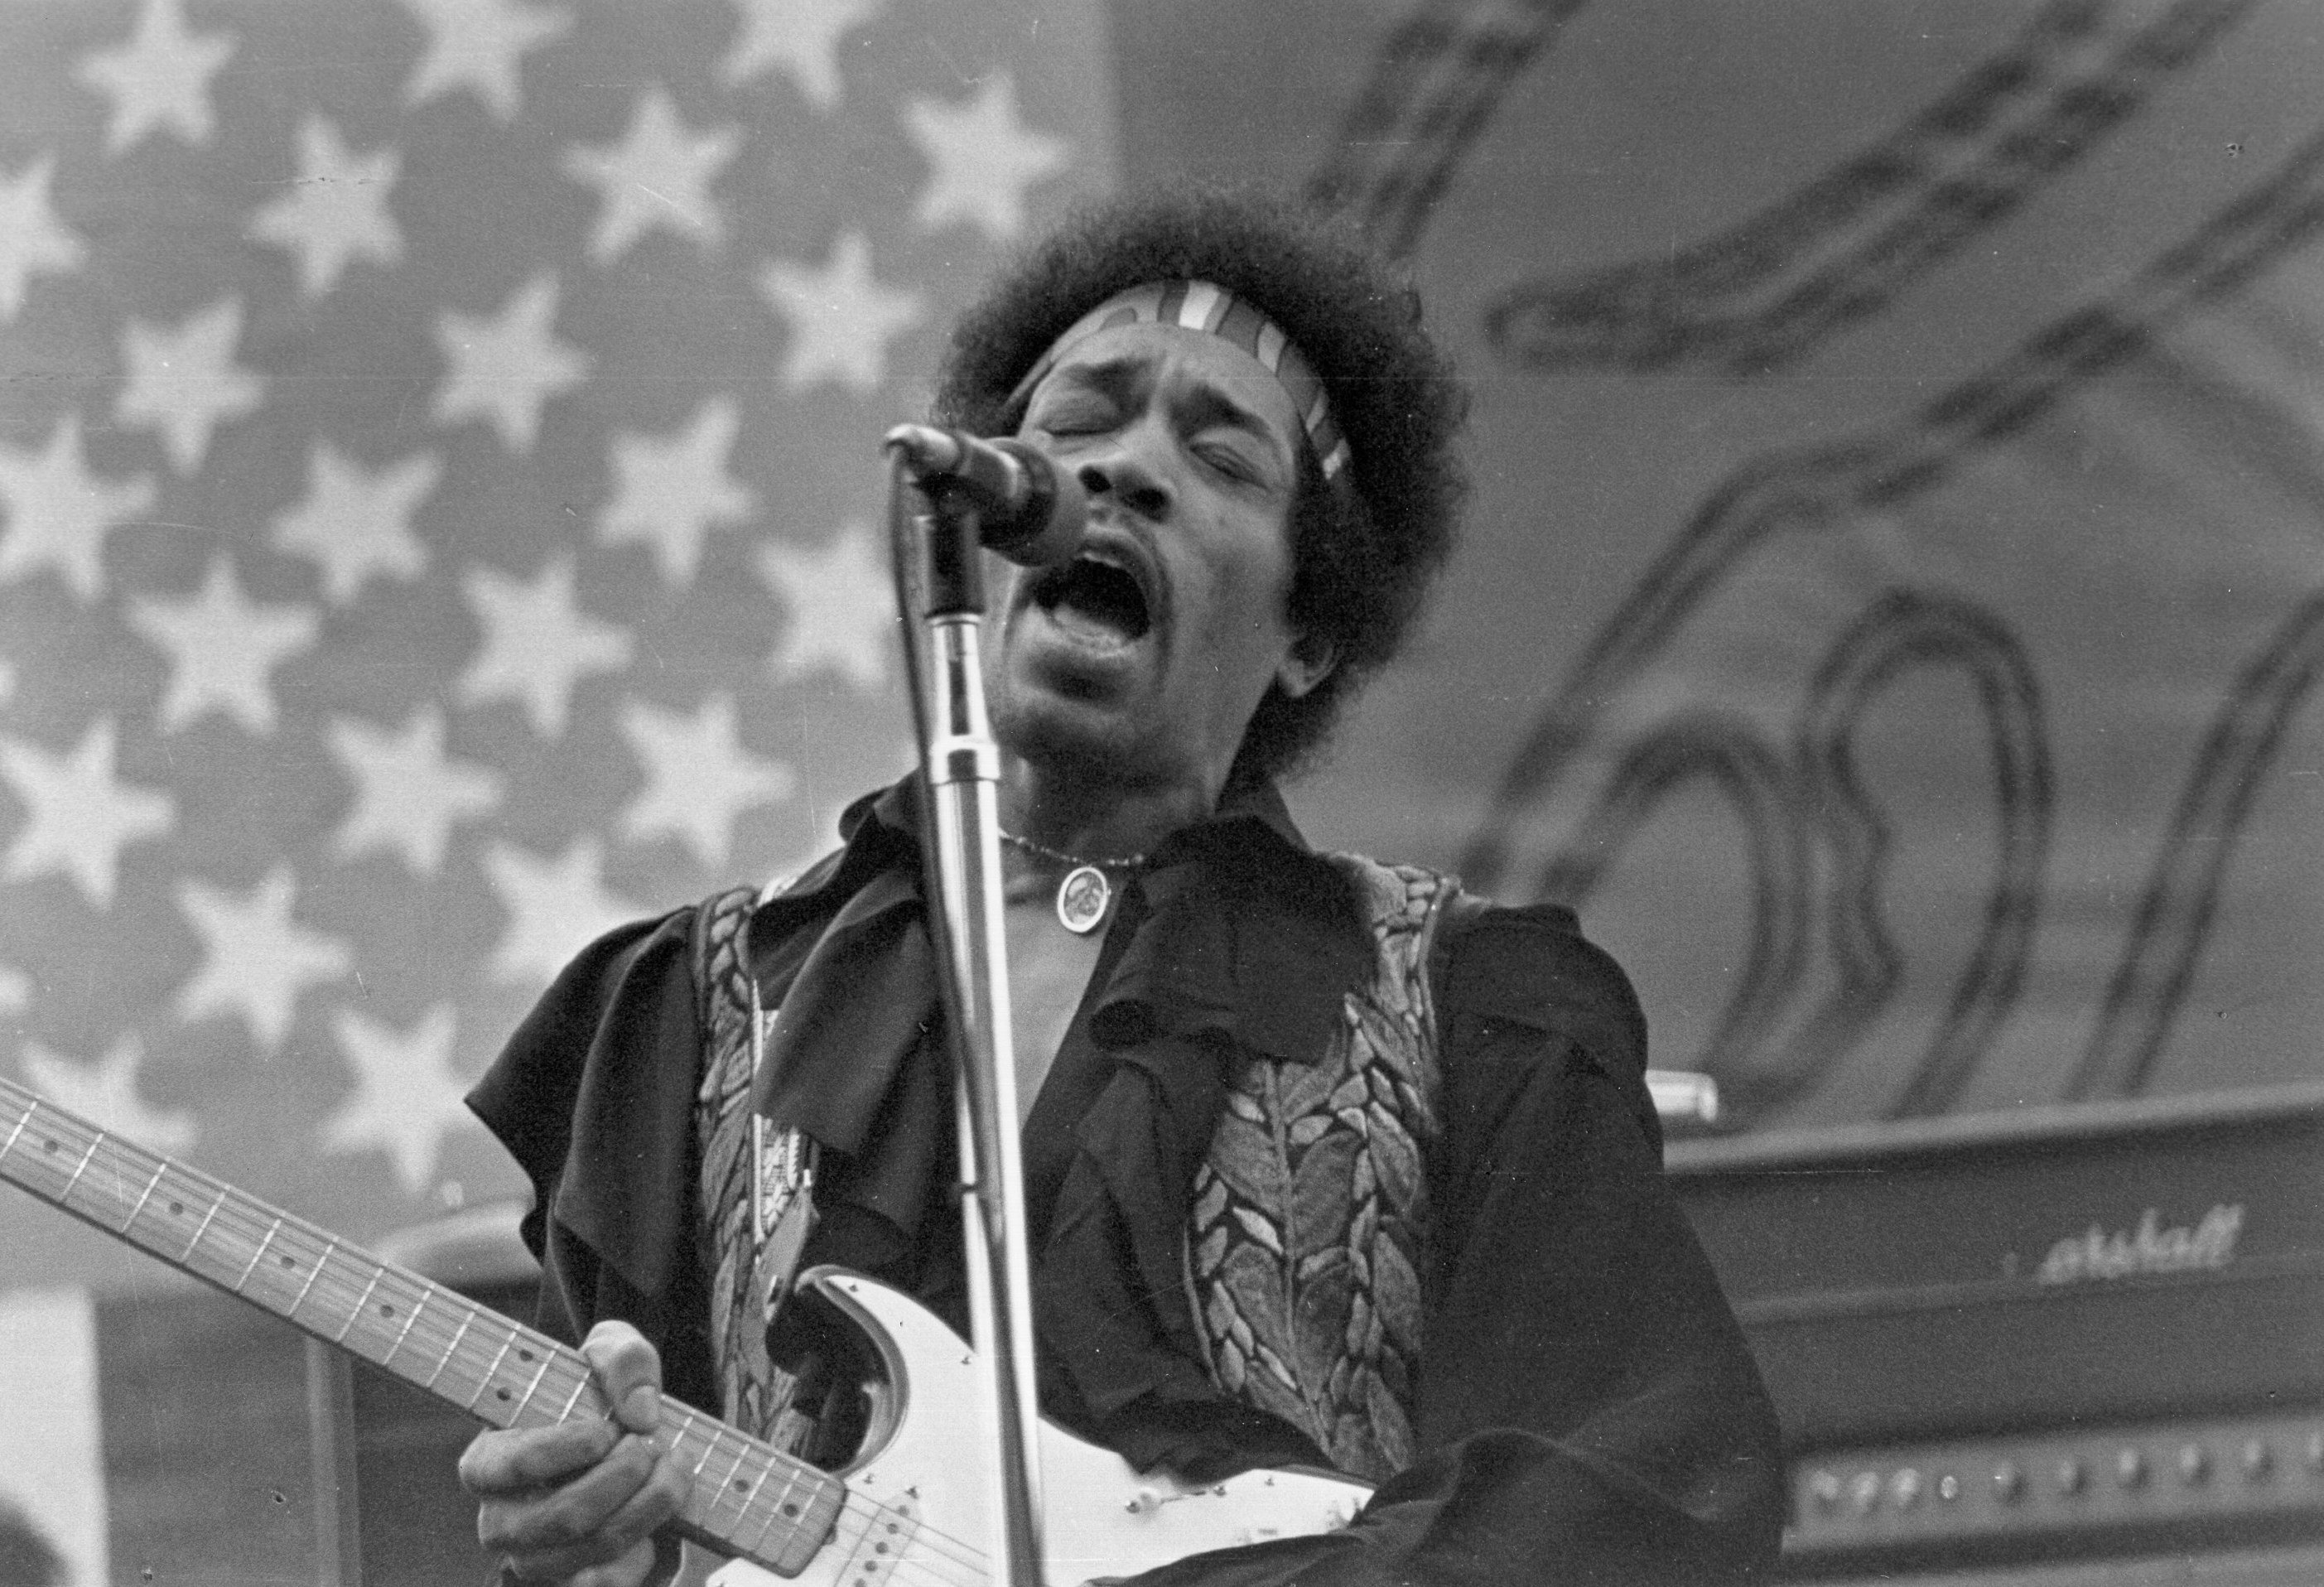 The U.S. Army Concluded Jimi Hendrix Couldn't 'Function While Performing Duties and Thinking About His Guitar'